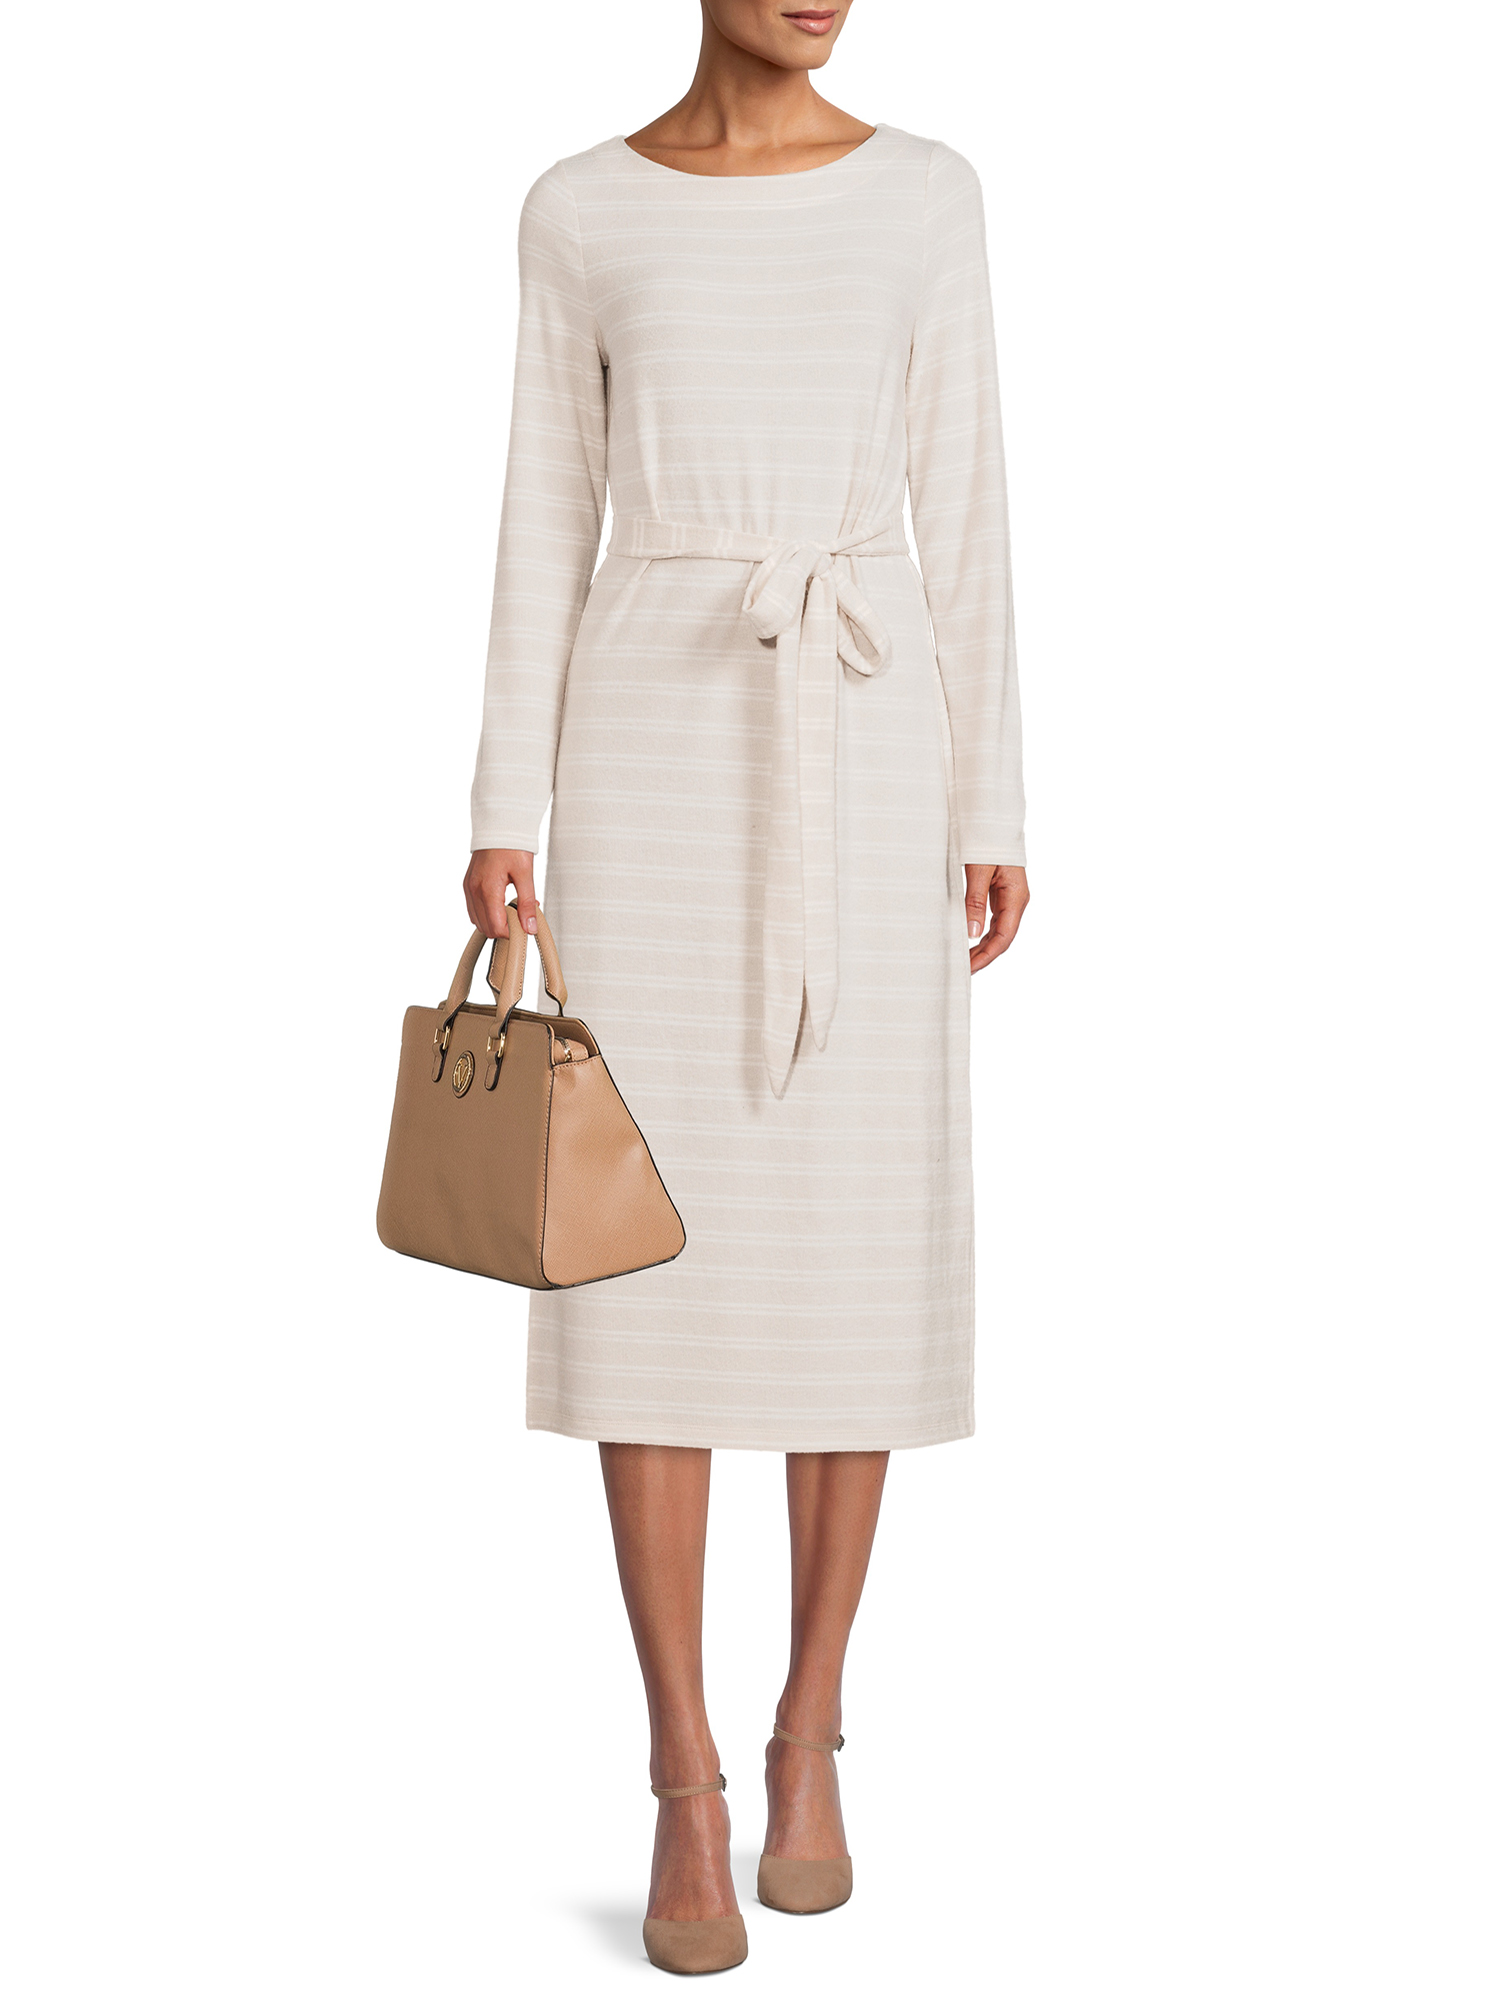 Time and Tru Women's Hacci Dress with Long Sleeves - image 2 of 5